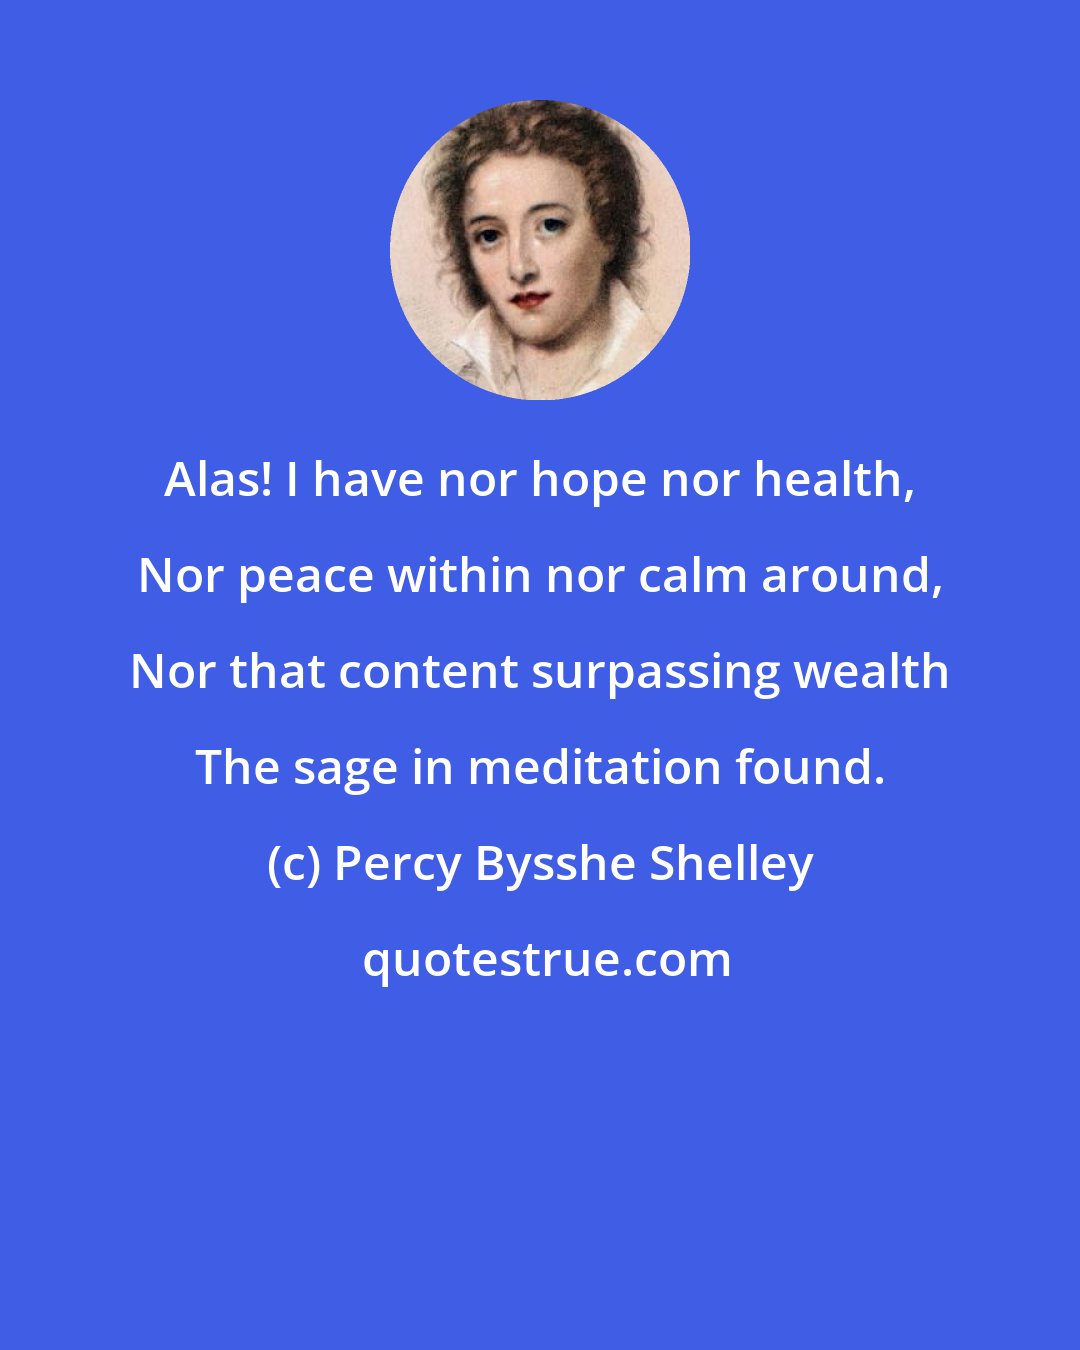 Percy Bysshe Shelley: Alas! I have nor hope nor health, Nor peace within nor calm around, Nor that content surpassing wealth The sage in meditation found.